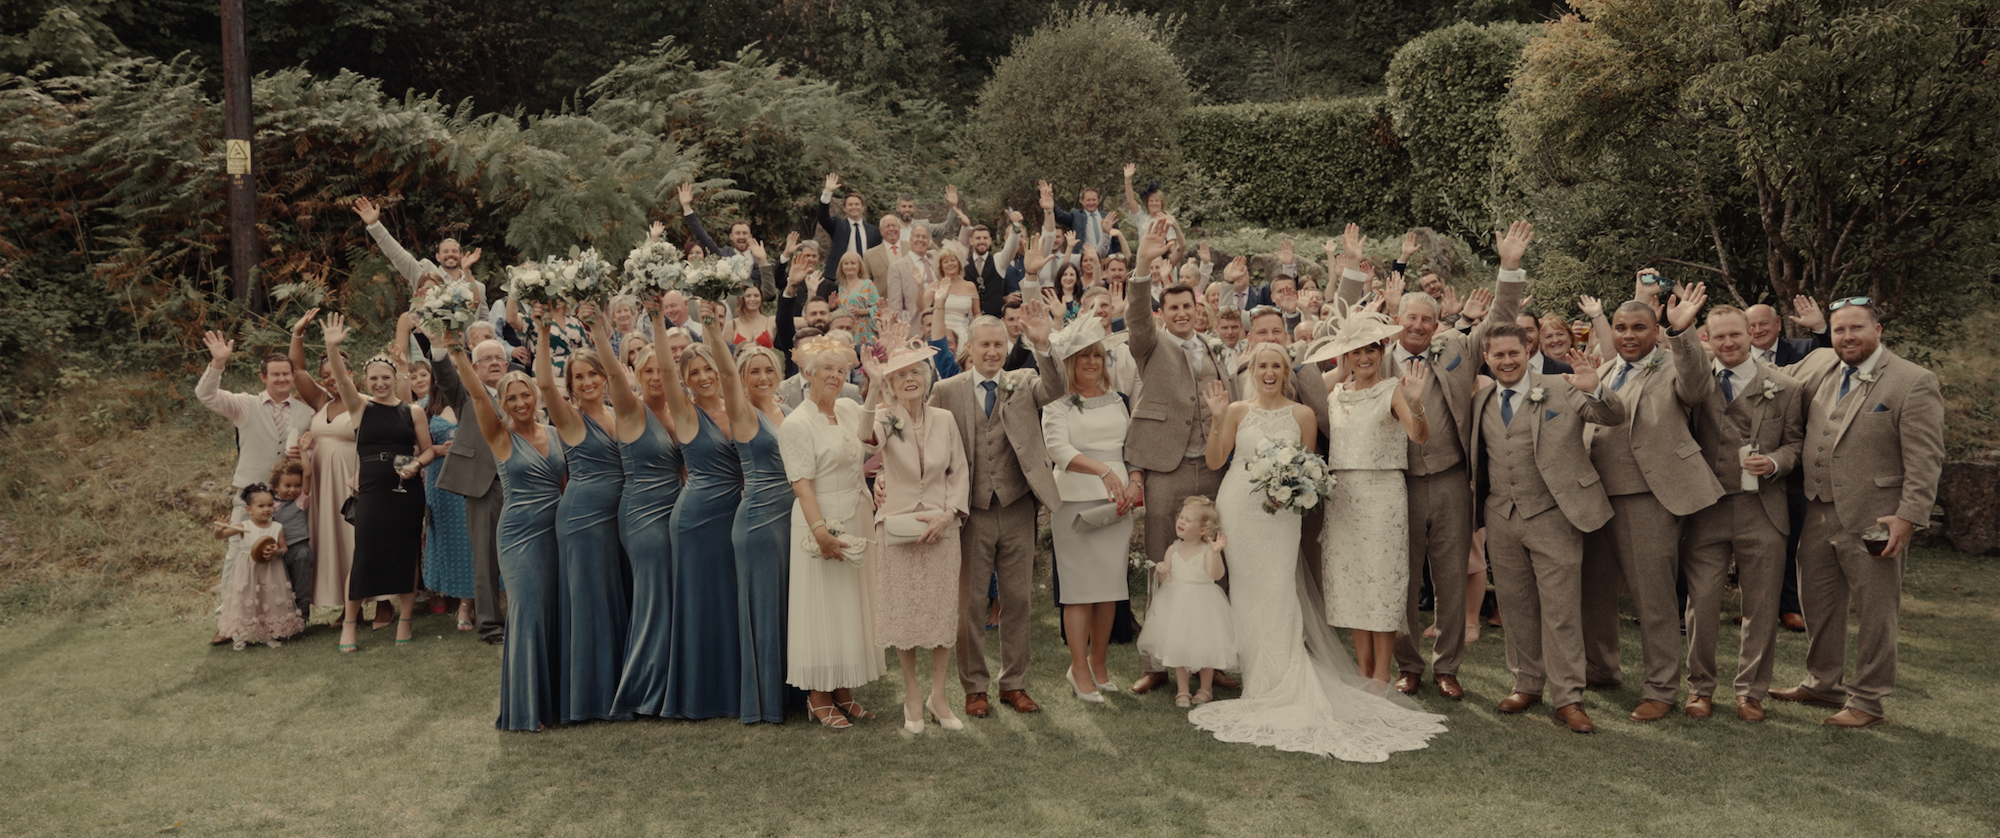 Oxwich Bay Hotel Wedding Videography by Ben Holbrook Films (Swansea South Wales).jpeg3.png